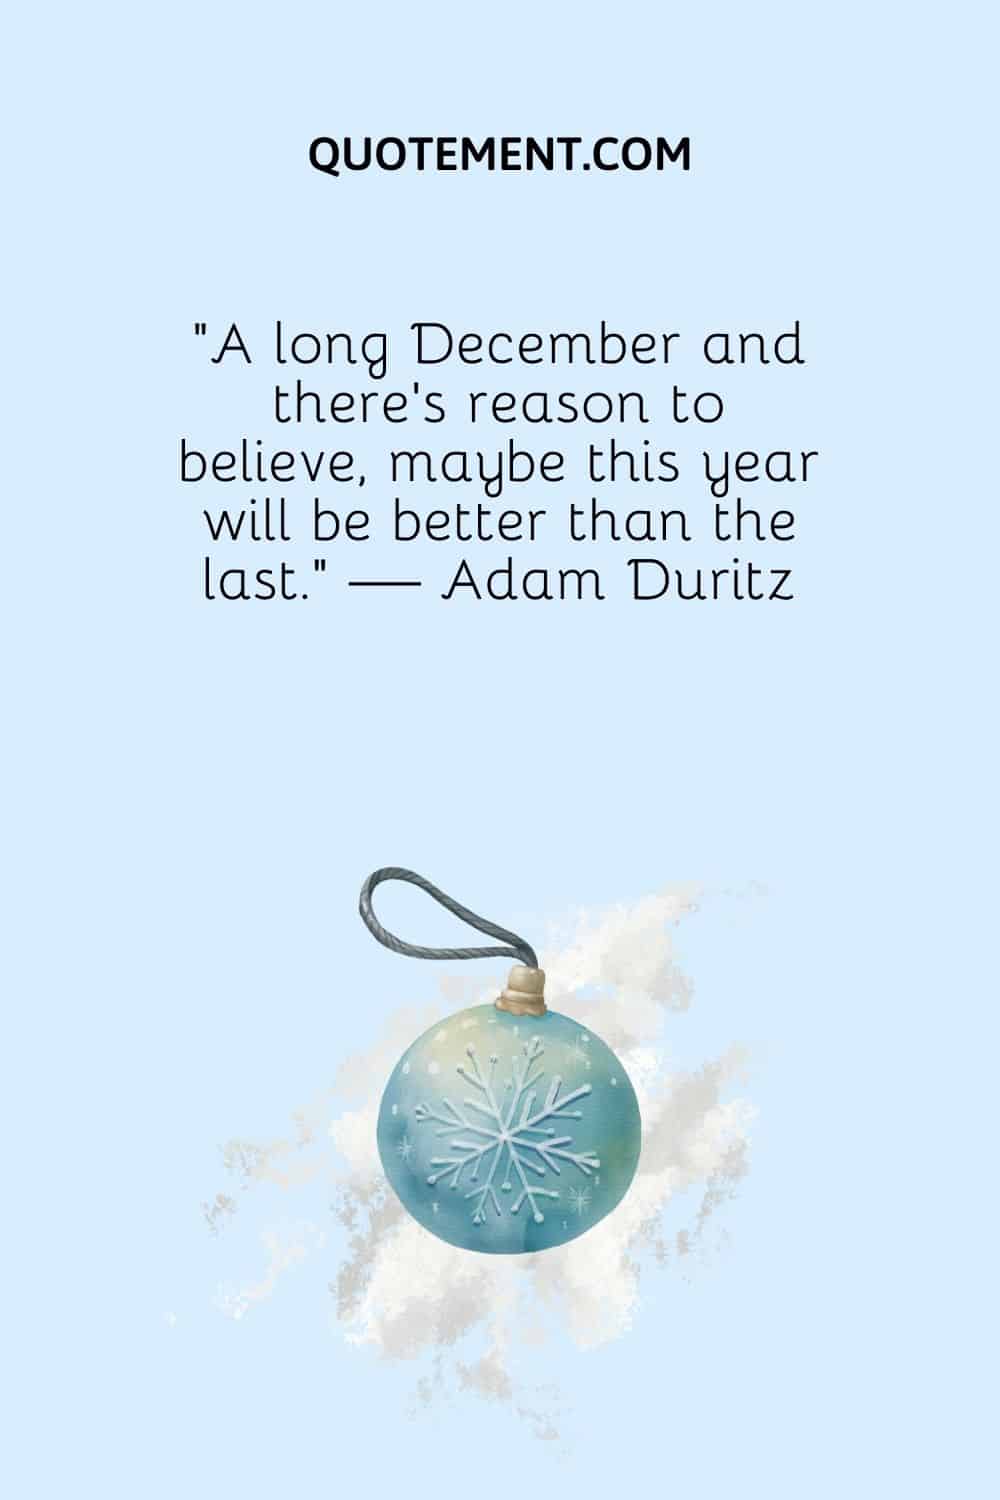 “A long December and there’s reason to believe, maybe this year will be better than the last.” — Adam Duritz